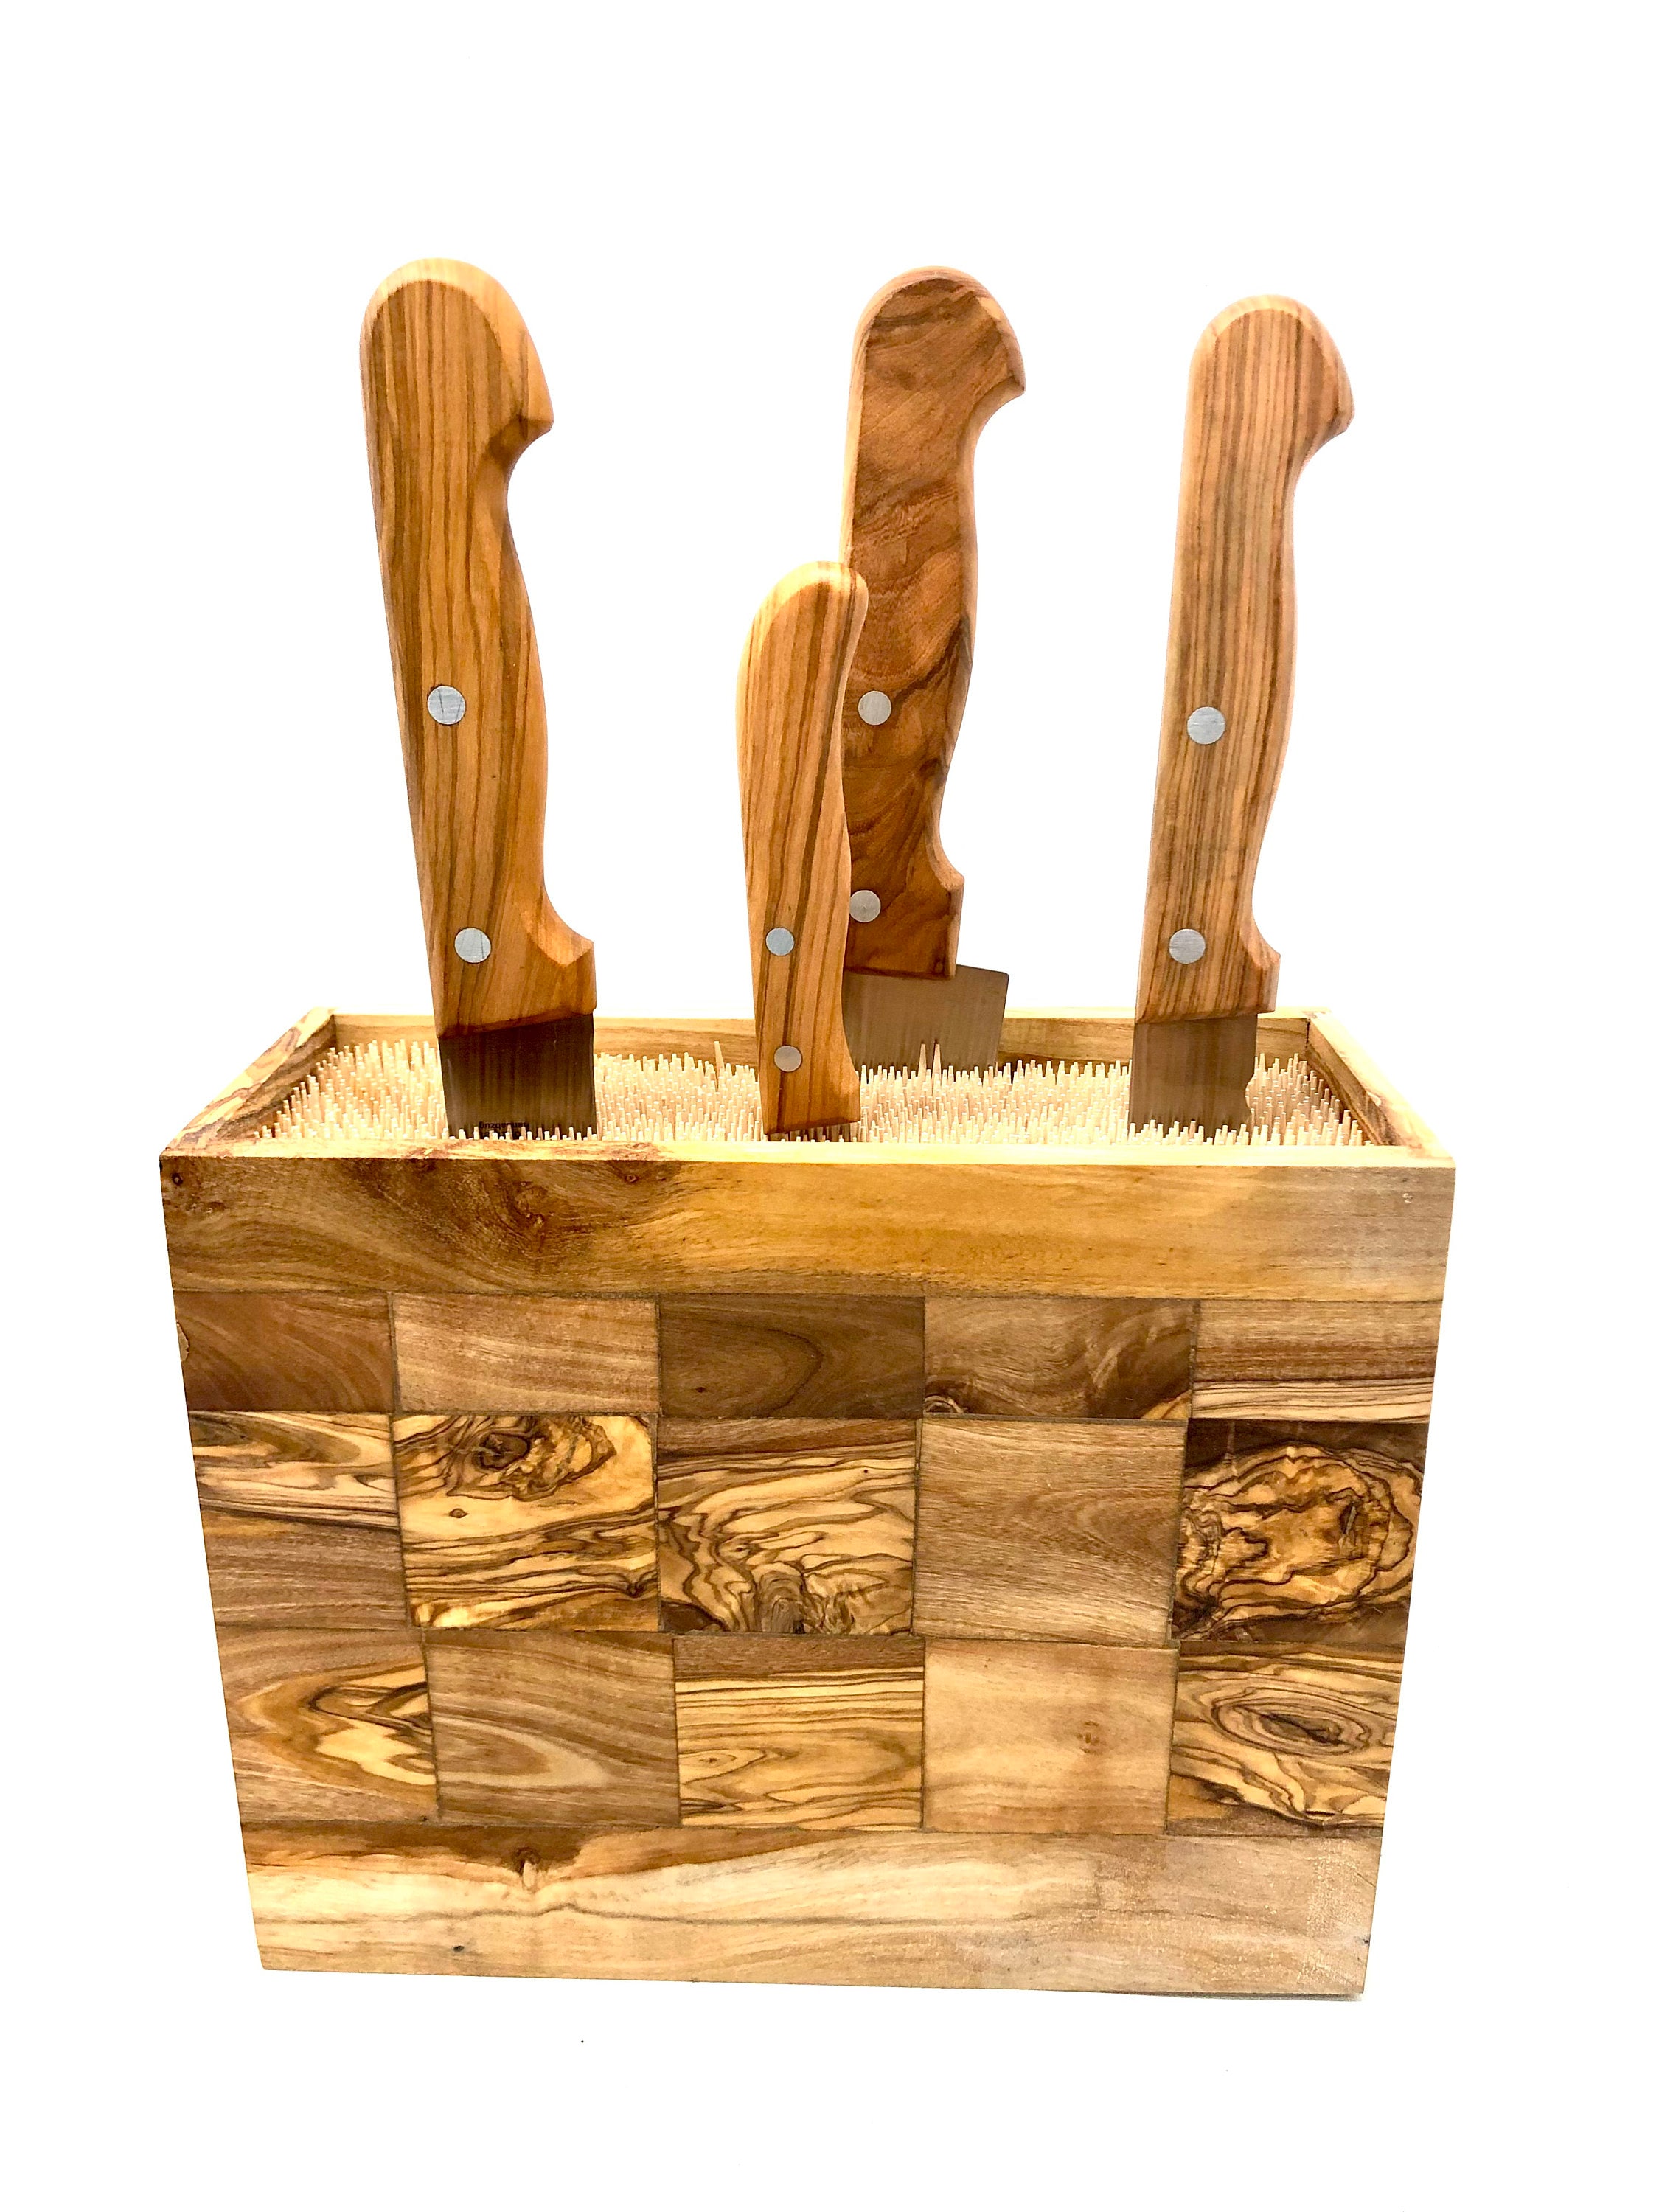 5.5“ Steak Knife Block Holder without Knives with 8 Slots - Eco-friendly  Wooden Steak Knife Storage Block only - Space Saver-Compact Design Steak